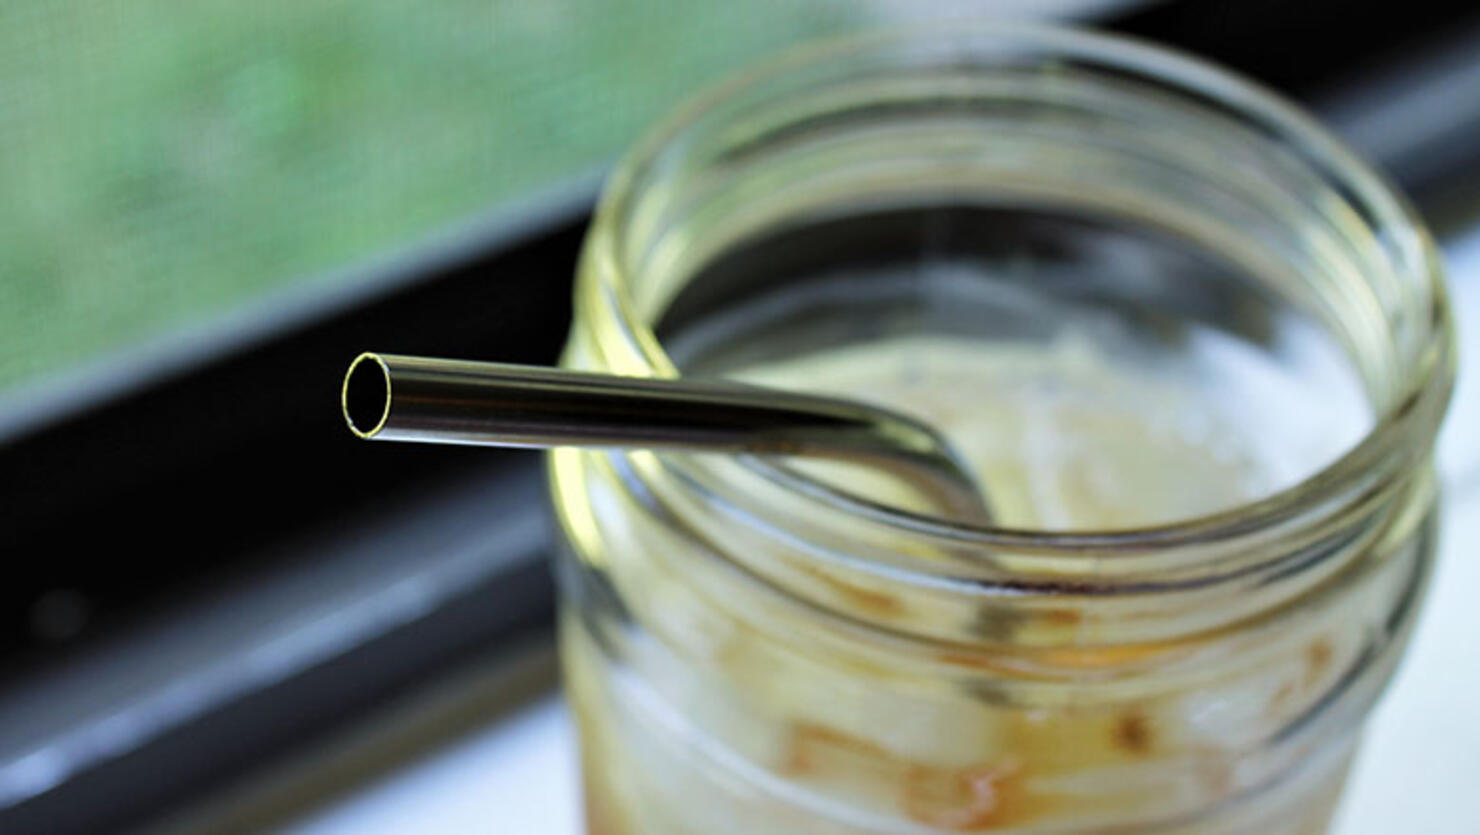 Ice tea in glass with metal straw